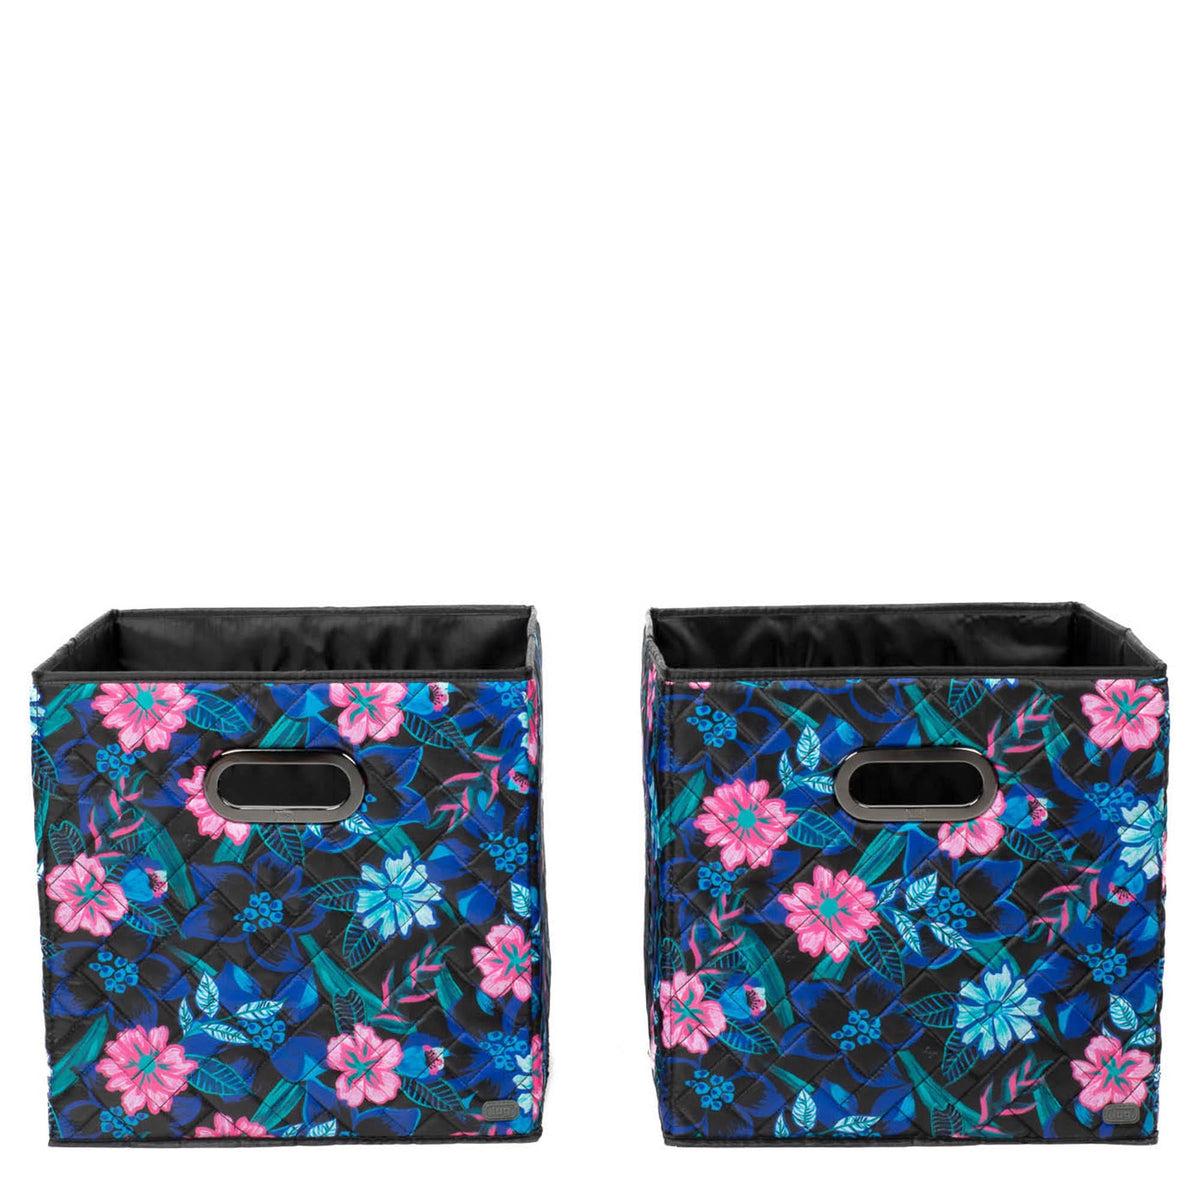 Cargo 2pc Collapsible Cube Bins